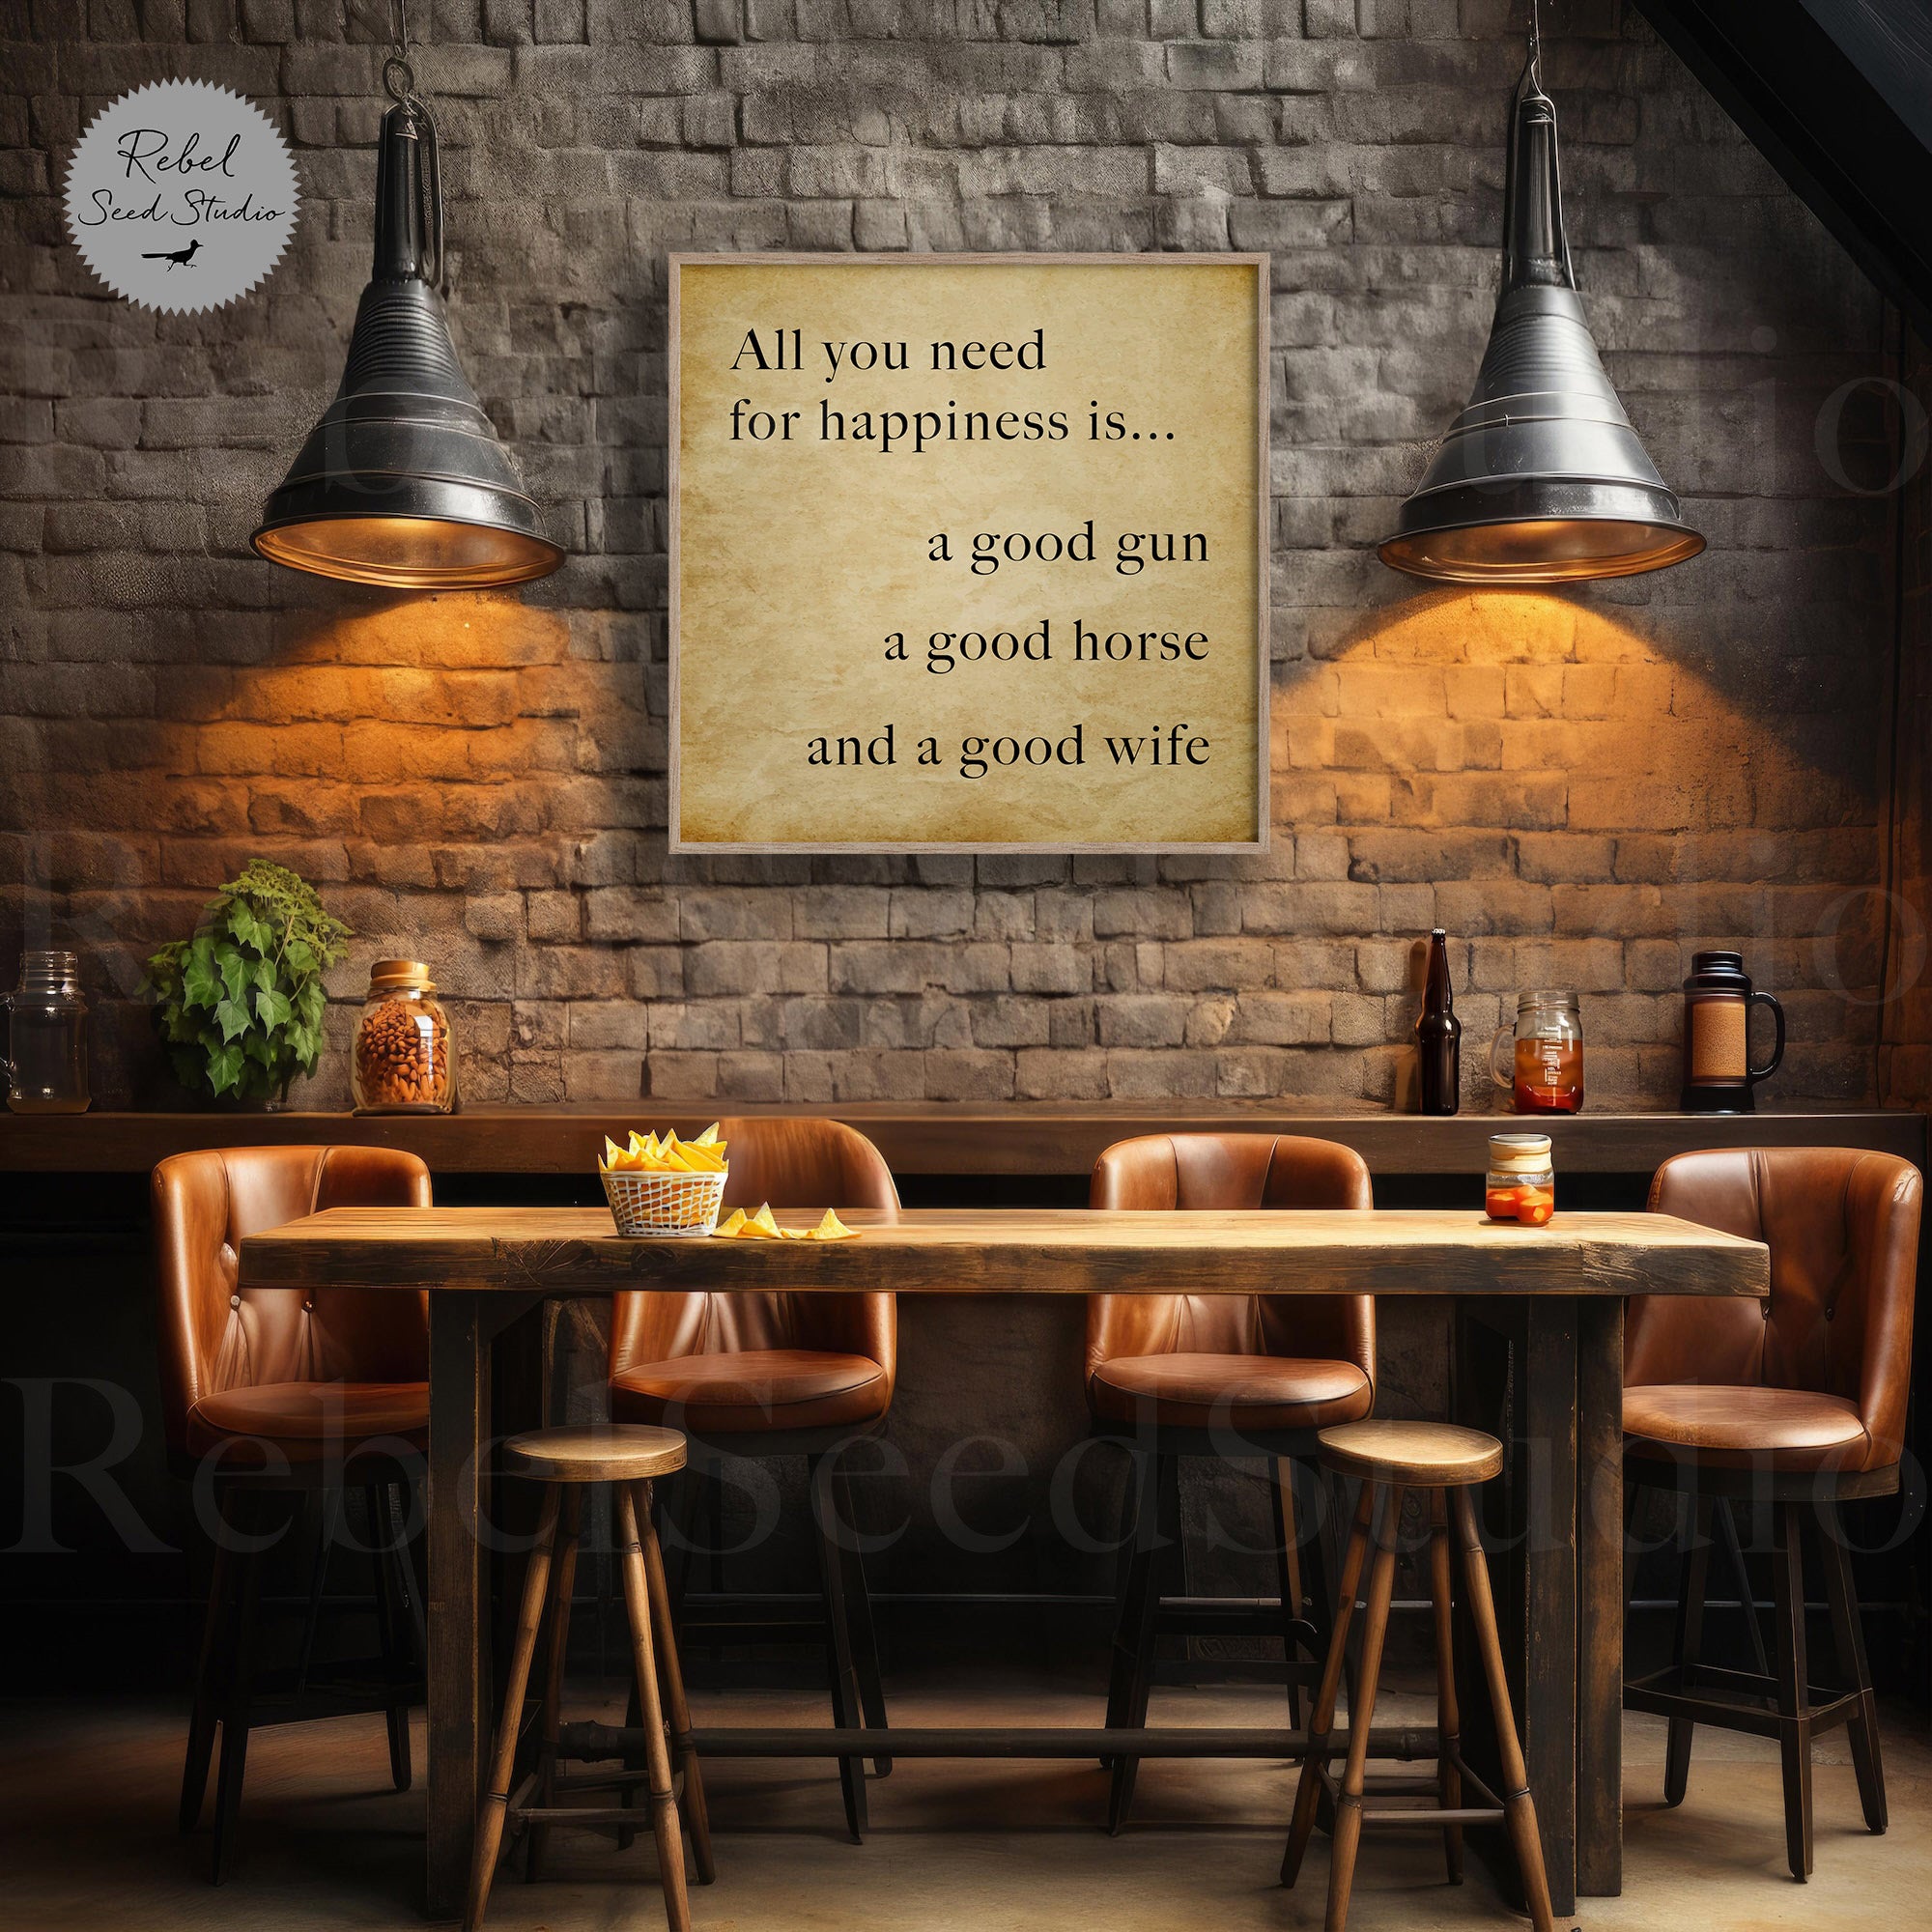 Daniel Boone Quote: All You Need For Happiness Is a Good Gun, a Good Horse & A Good Wife - Wall Art (Metal Print, Archival Print or Poster Print)